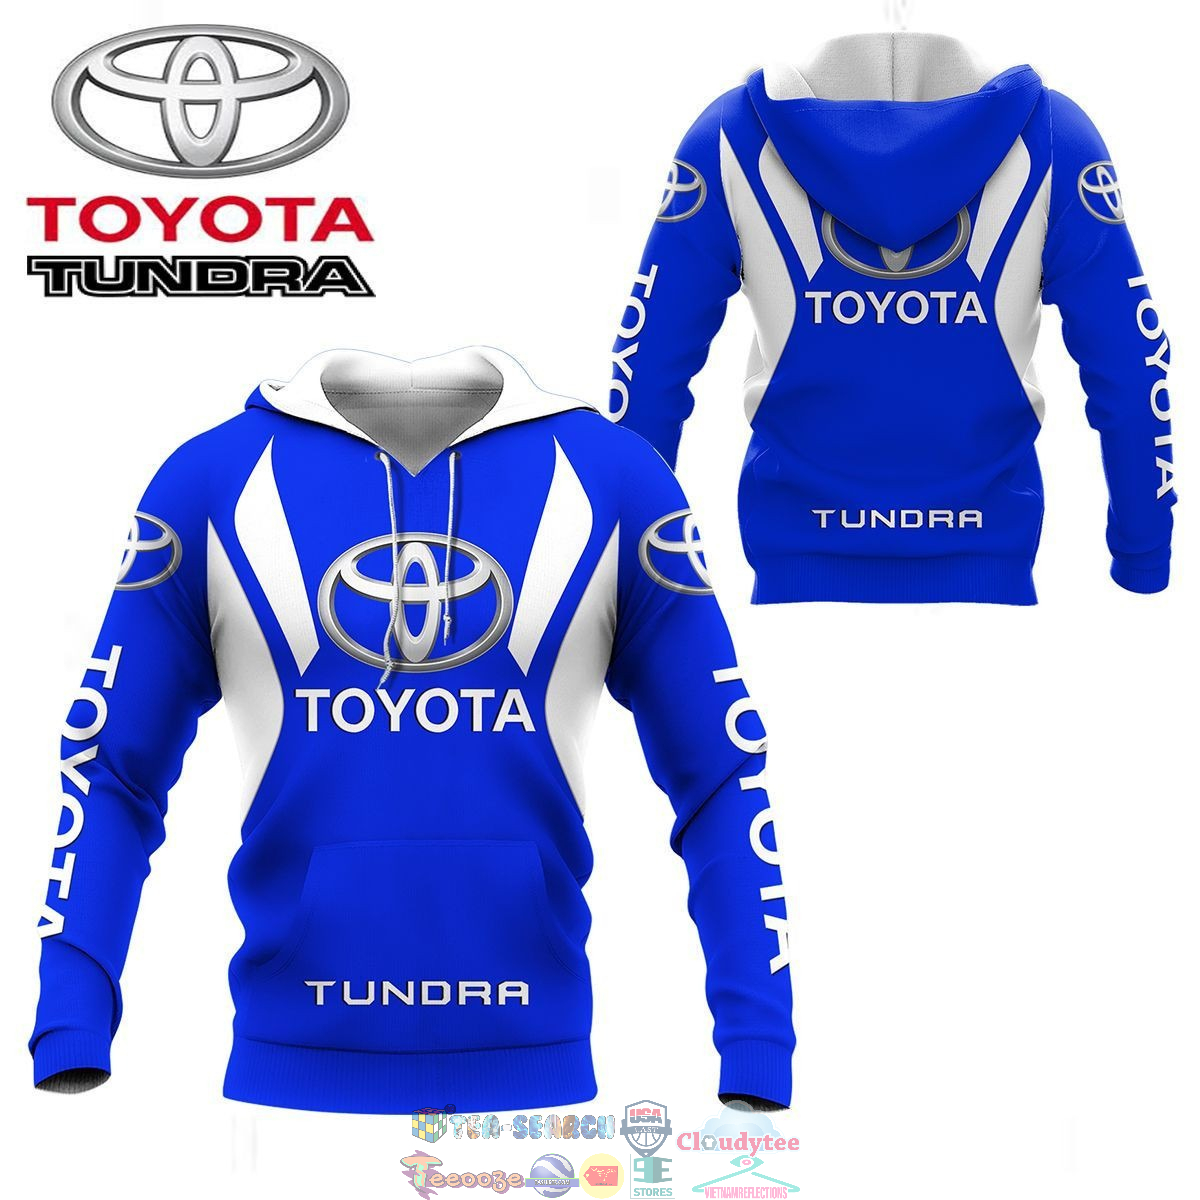 Toyota Tundra ver 22 3D hoodie and t-shirt